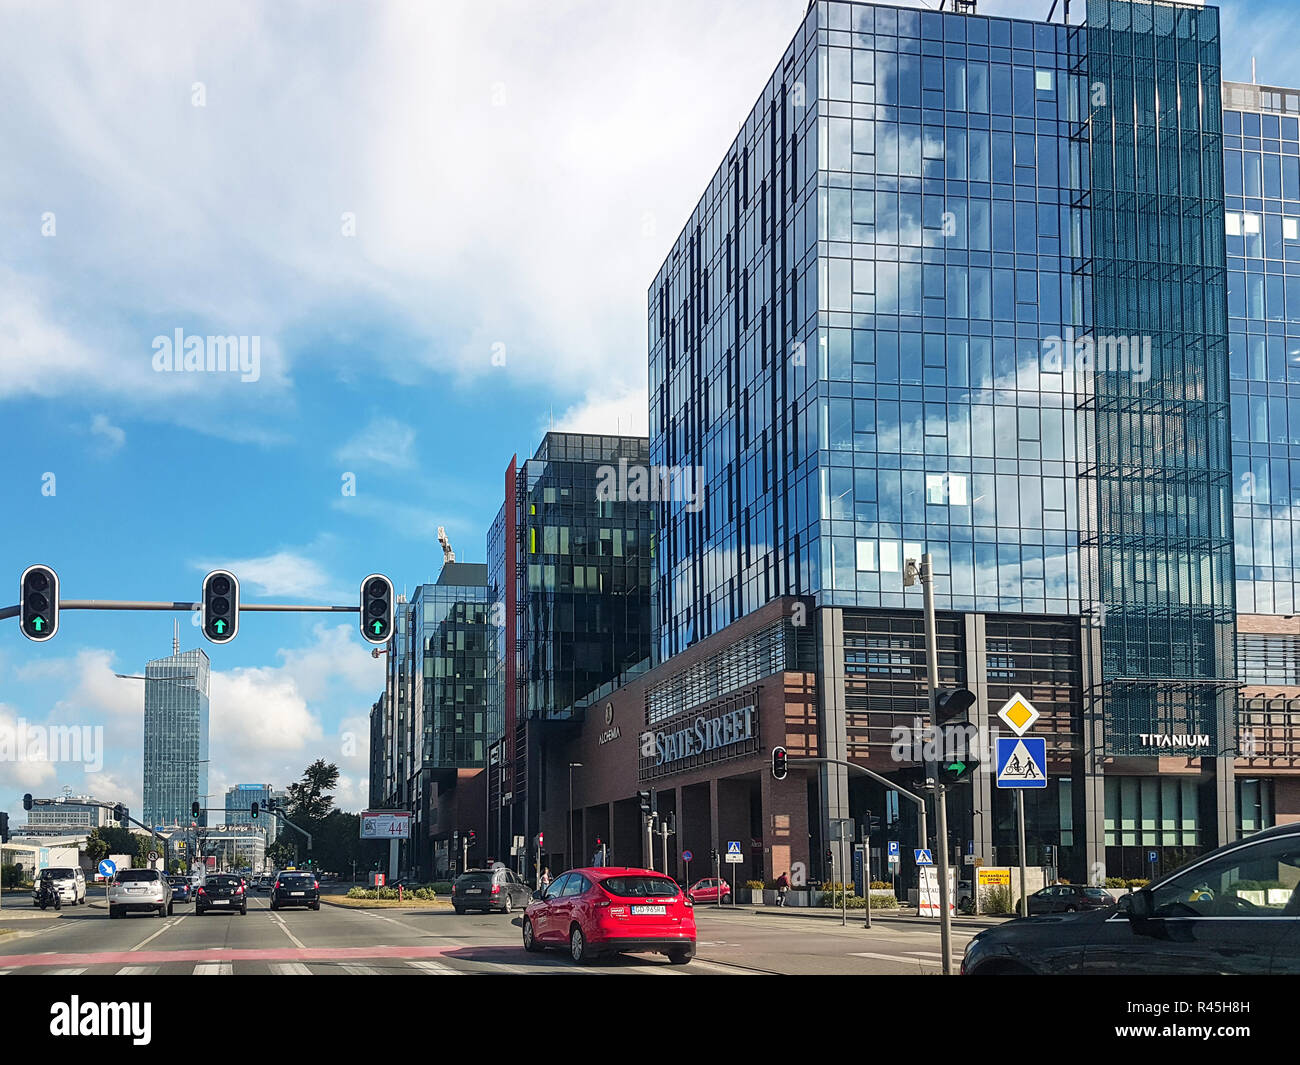 Gdansk, Poland - June 27, 2018: Modern corporate buildings in the centre of Gdansk City. Gdańsk is one of the most dynamically developing Polish citie Stock Photo